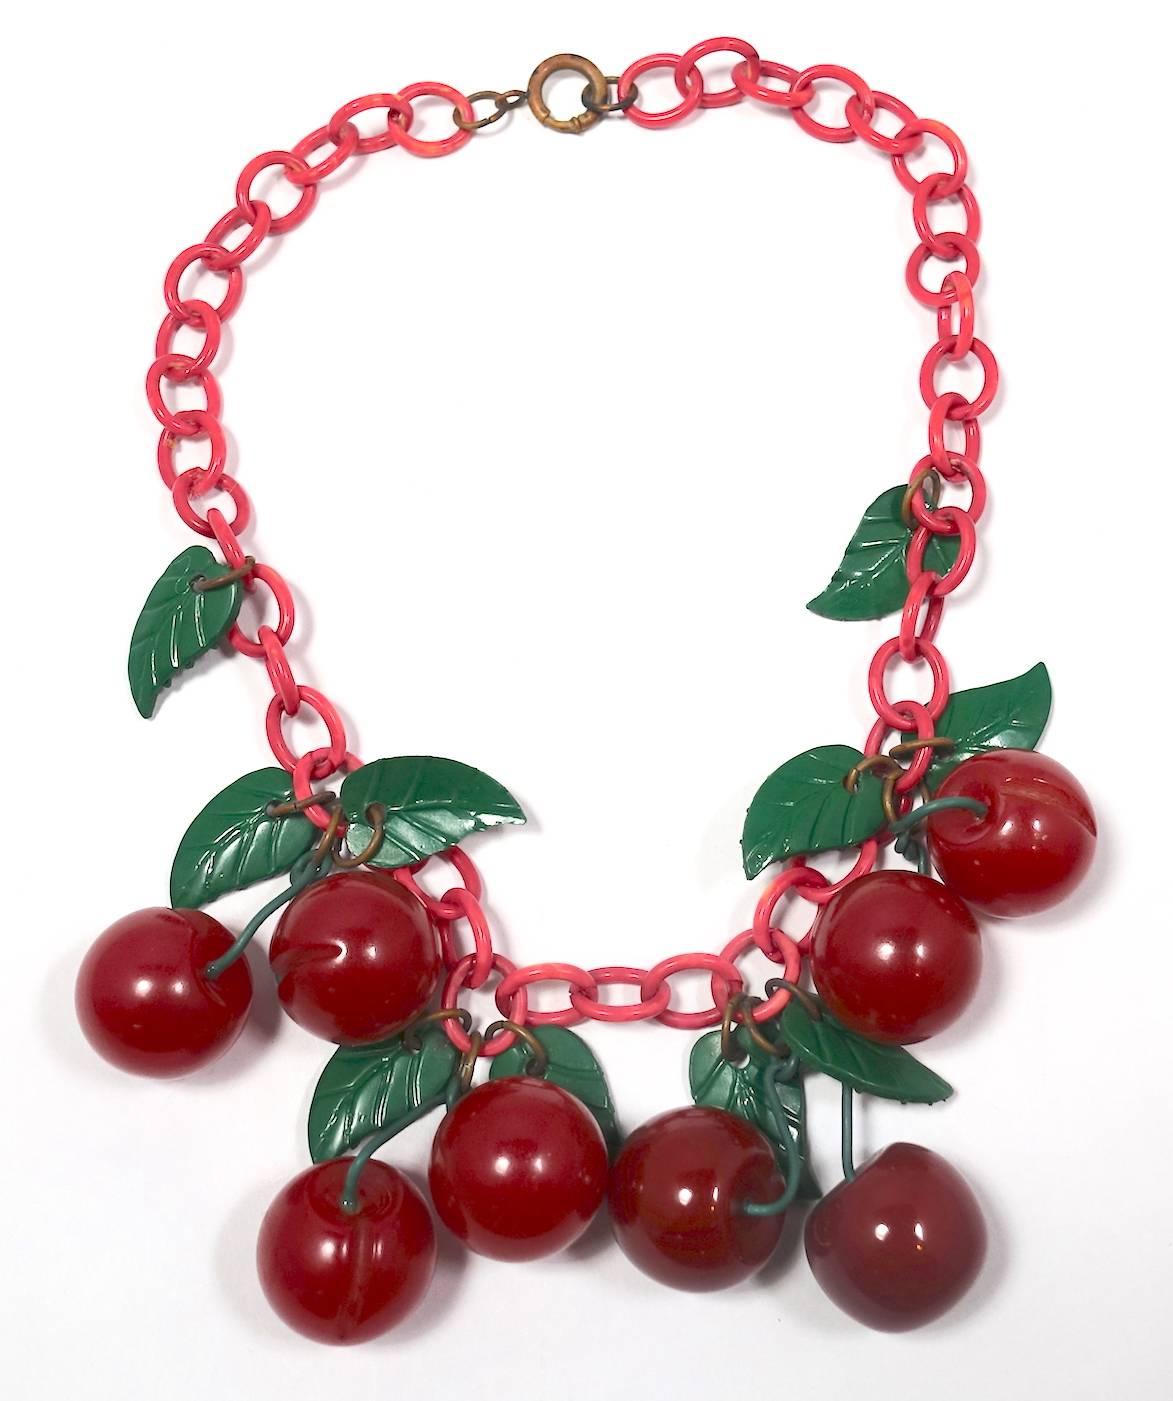 This is the famous 1930s dimpled cherry necklace consisting of 8 carved Bakelite cherries and leaves on a red celluloid open link chain with a spring closure.  In excellent condition, this collectible piece measures 16-1/2” long and the chain width